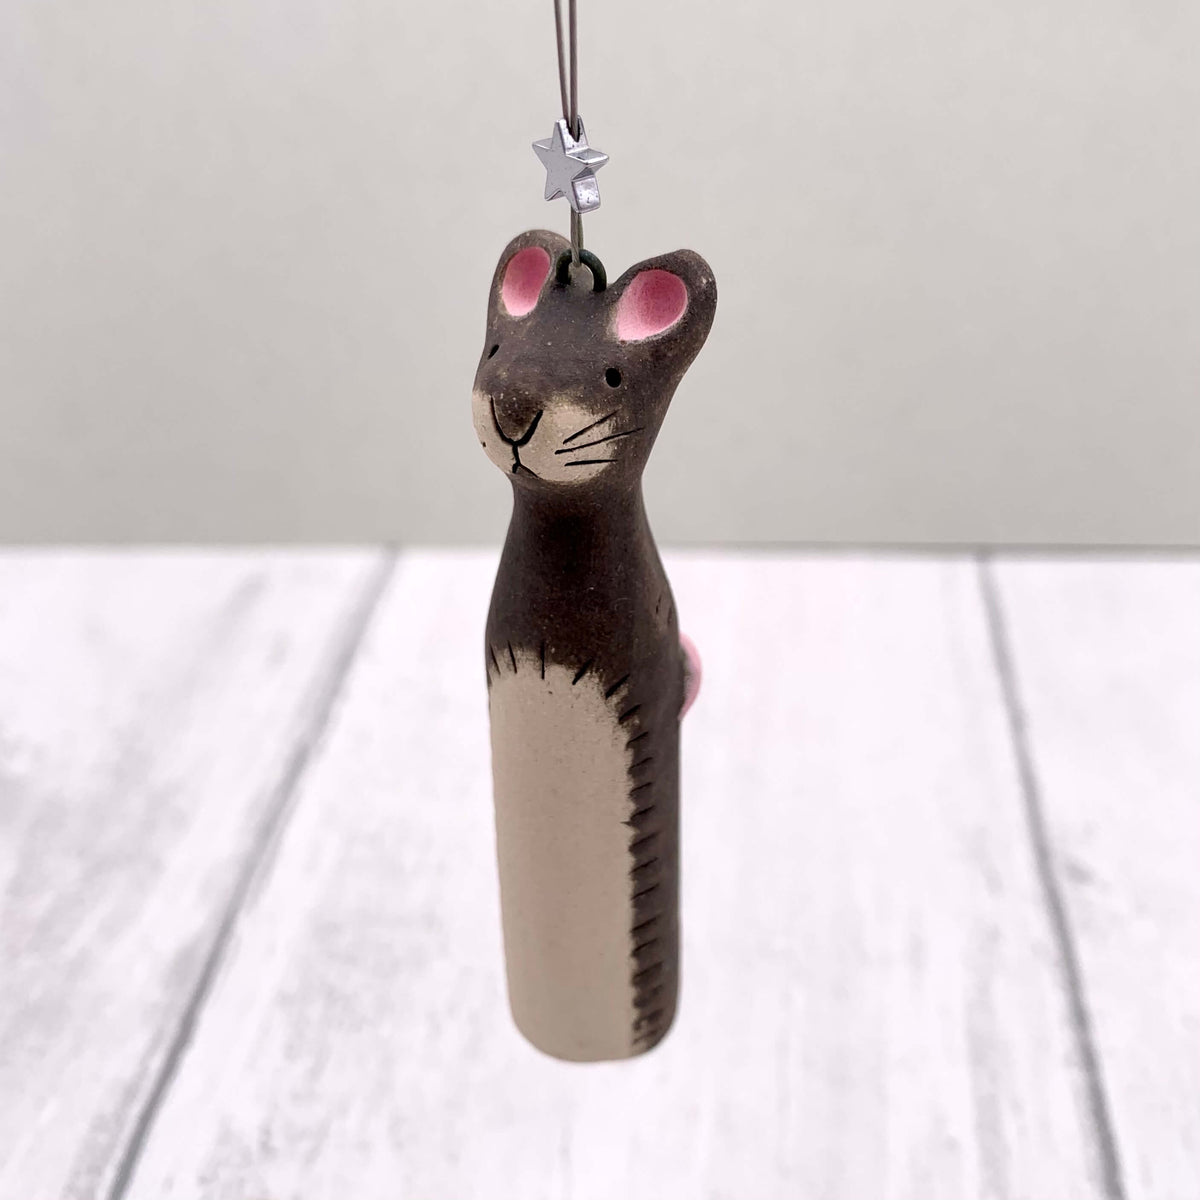 Handmade ceramic hanging of a grey mouse, with a pink tail and silver star.